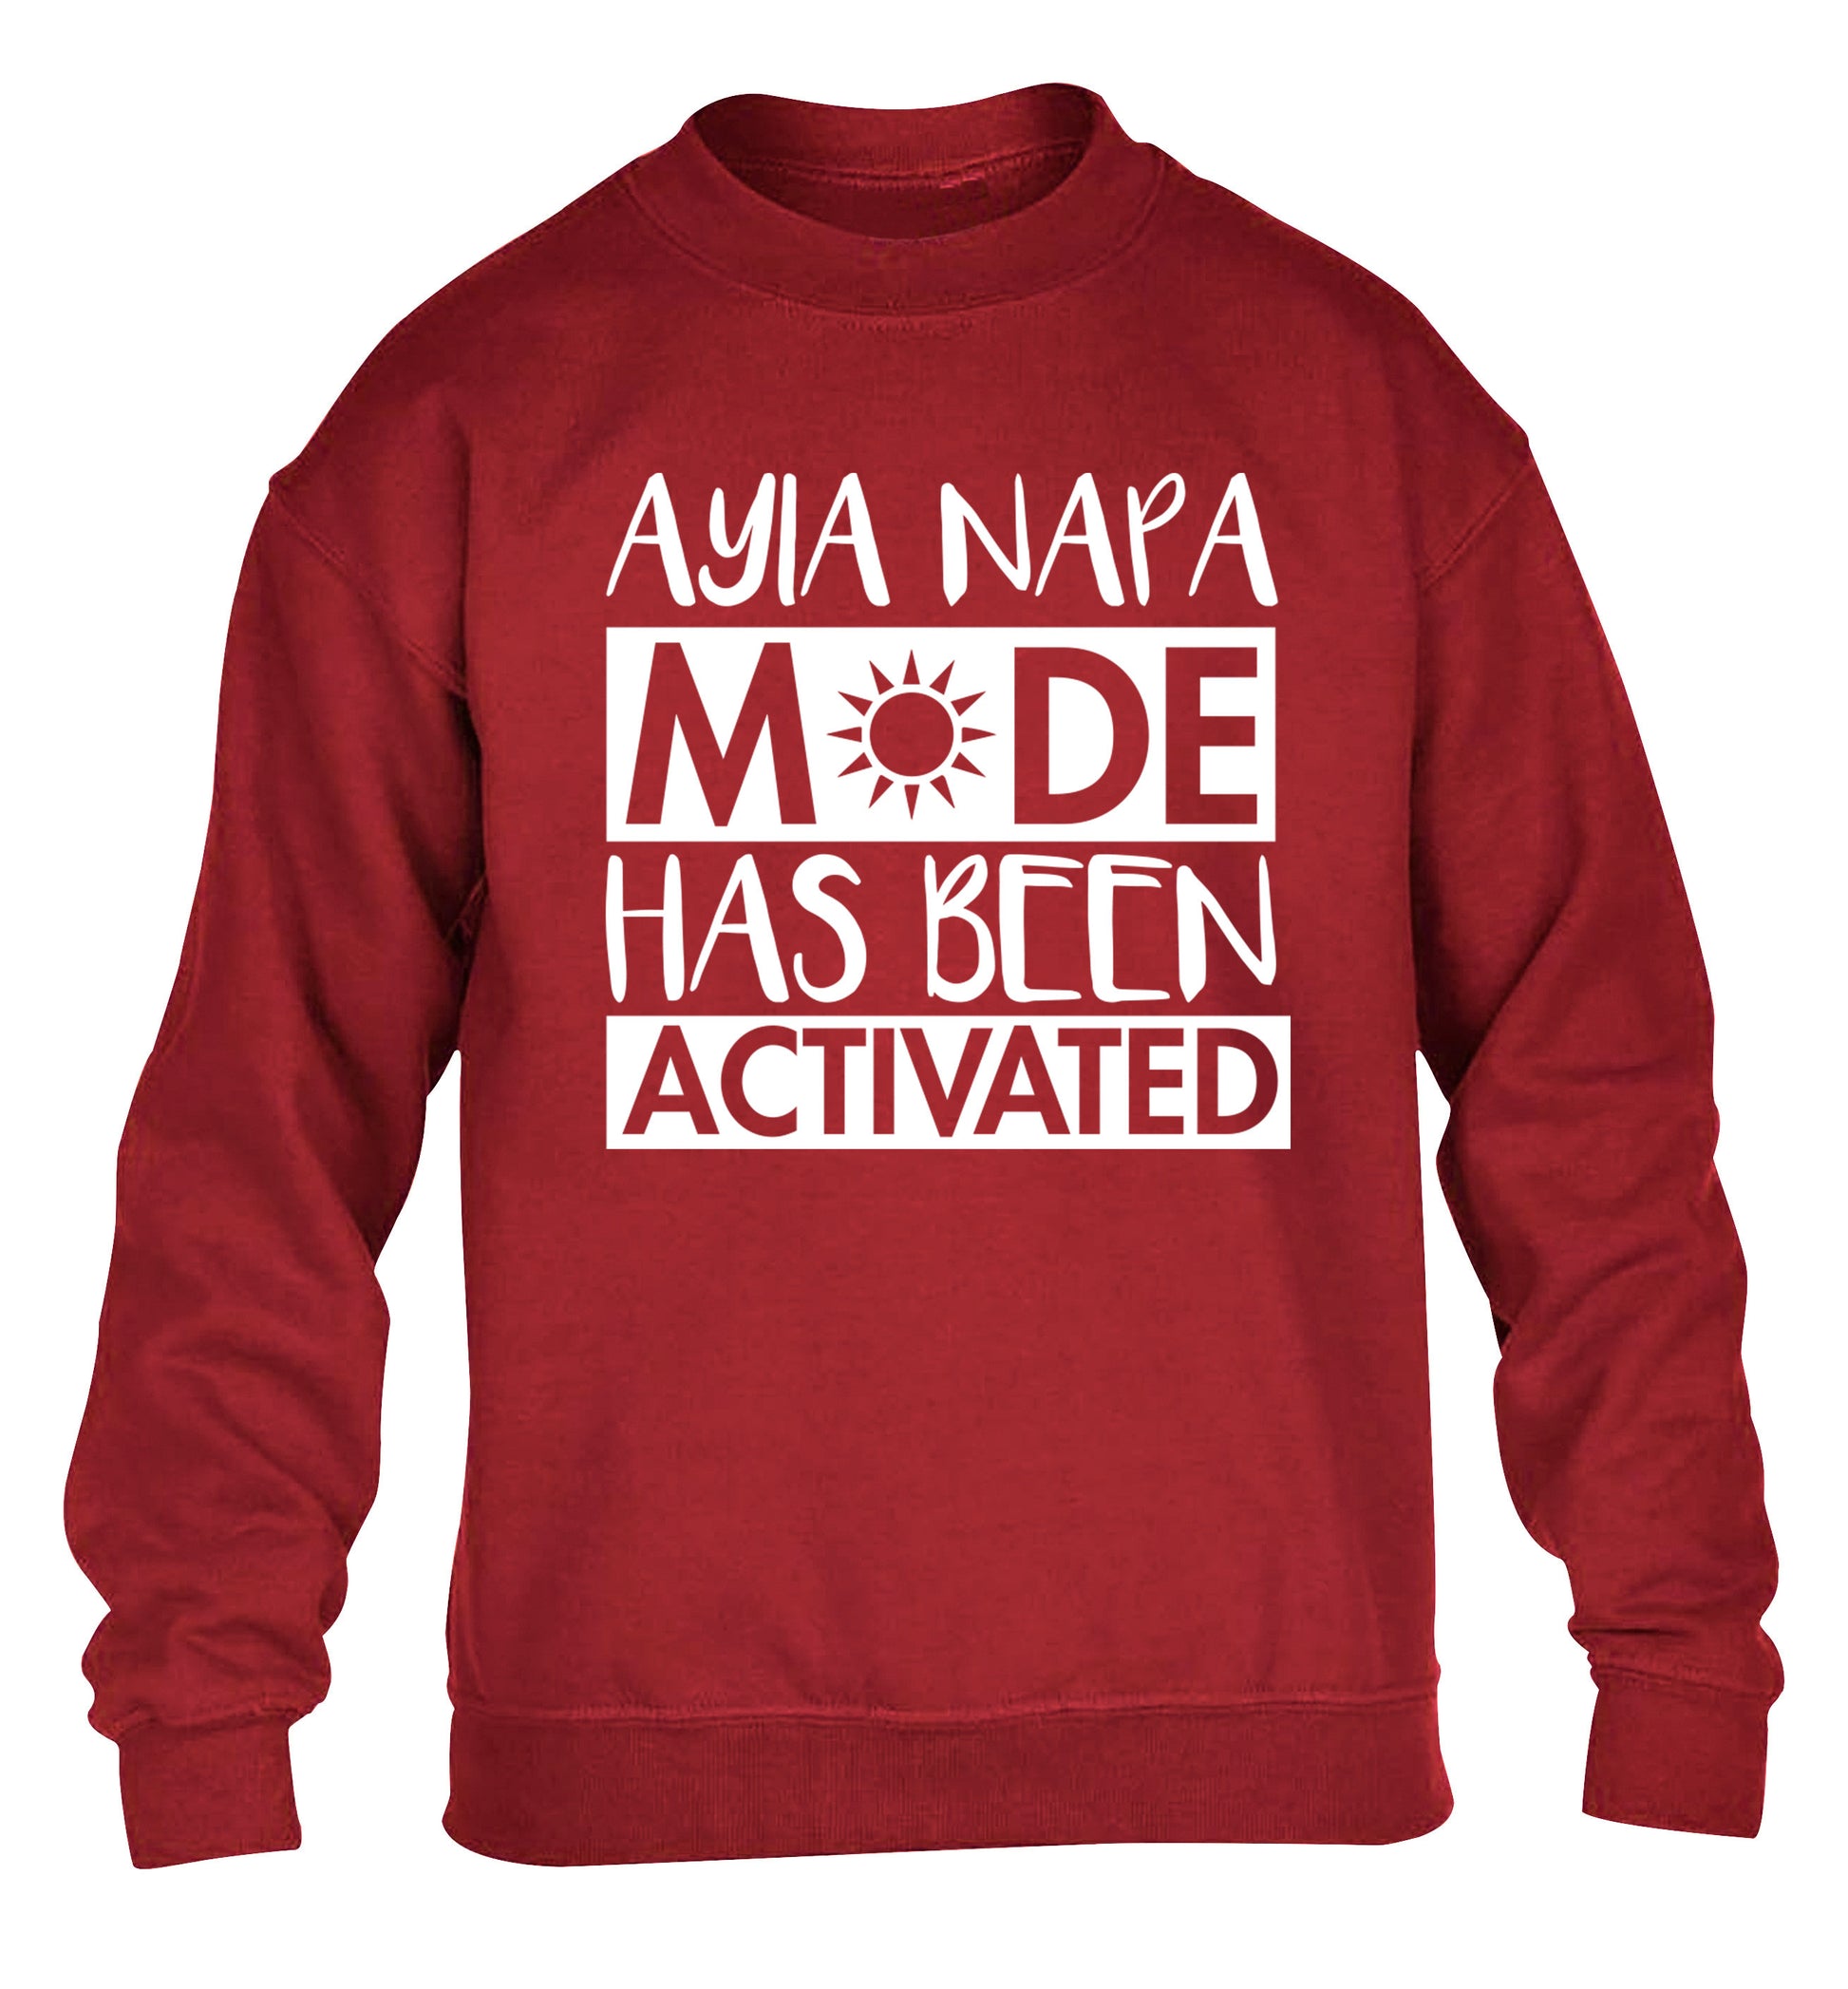 Aiya Napa mode has been activated children's grey sweater 12-14 Years